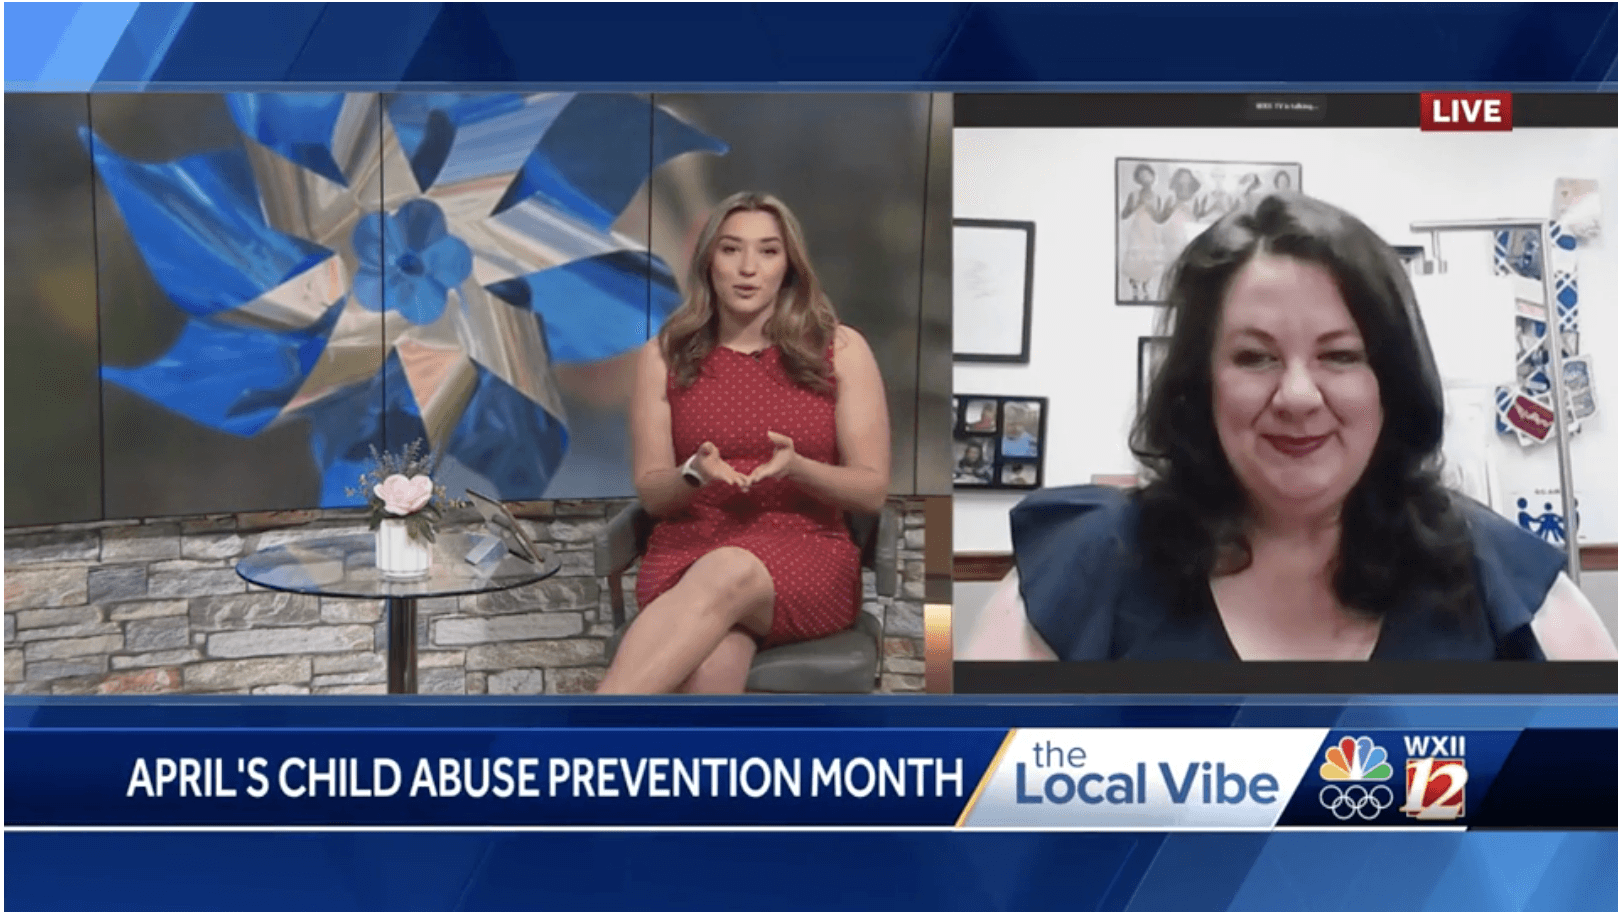 WXII's Local Vibe today: Child Abuse Prevention in the Triad